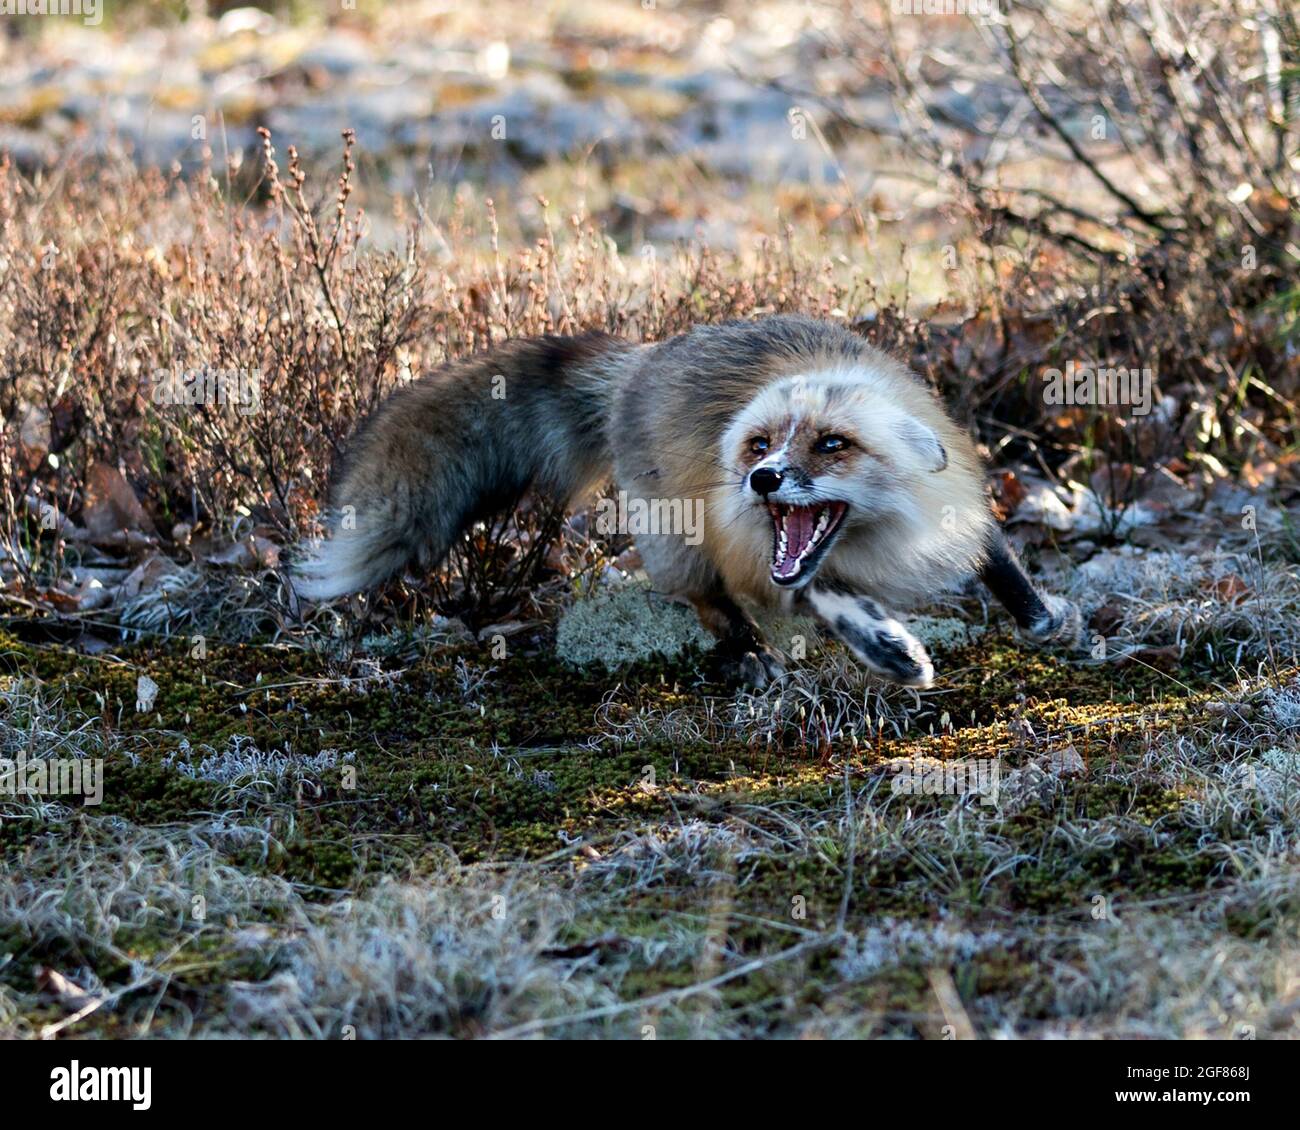 Red fox with a mad look, displaying open mouth, teeth, ears behind its head with a bushy tail in its environment and habitat with foliage and moss. Stock Photo